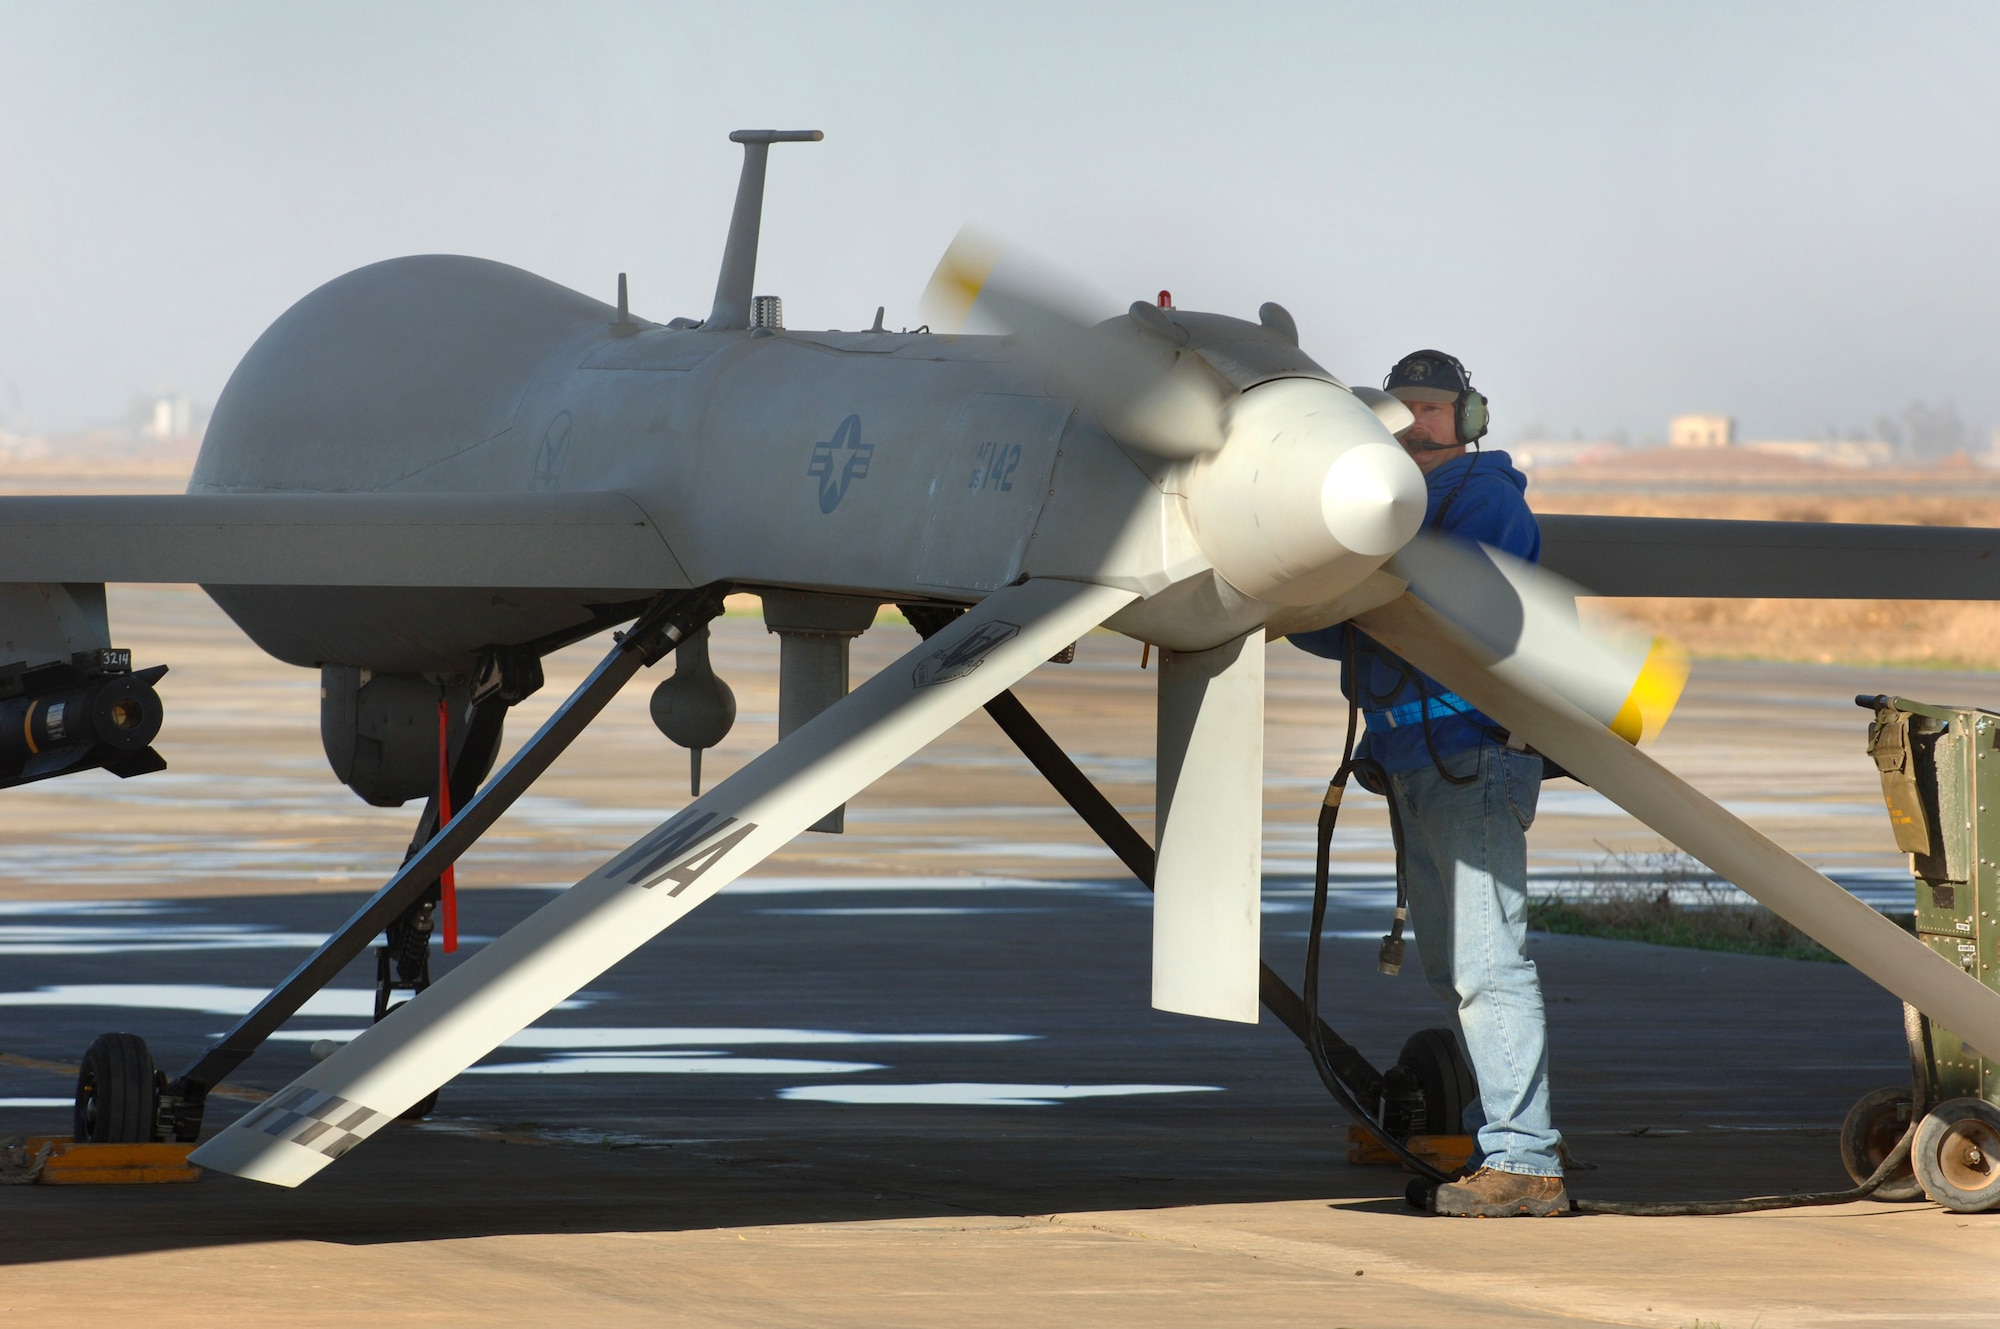 Bruce Ottenwess conducts pre-flight checks before launching the  MQ-1 Predator Unmanned Aerial Vehicle Jan. 31 from Balad Air Base, Iraq. Mr. Ottenwess is a General Atomics Aeronautical Systems Airframe and power plant mechanic based out of Creech Air Force Base, Nev. (U.S. Air Force photo/Staff Sgt. Michael R. Holzworth) 